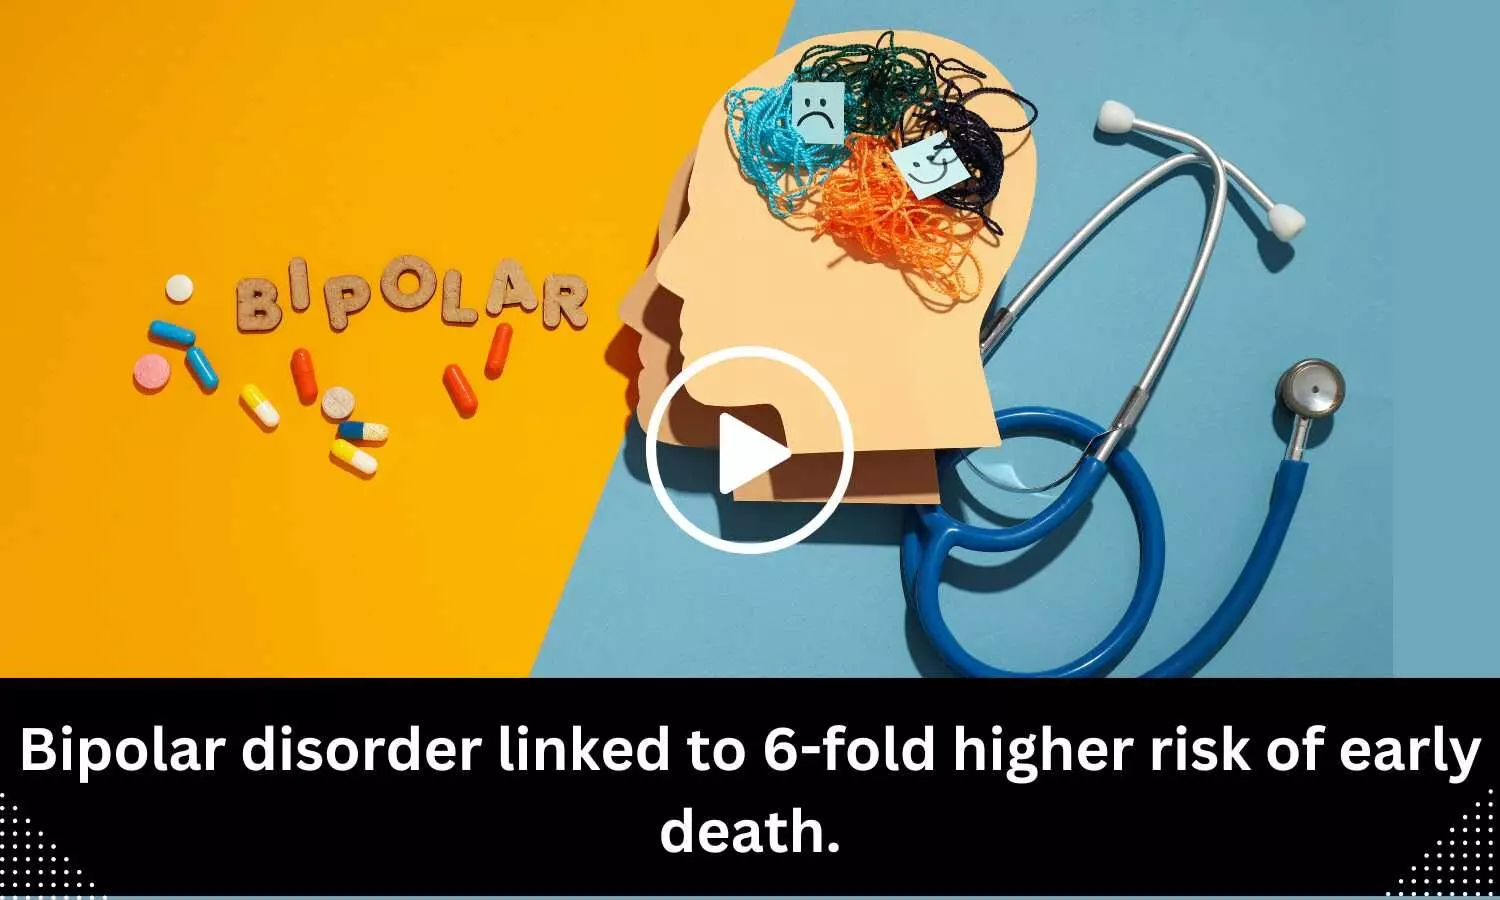 Bipolar disorder linked to 6-fold higher risk of early death.